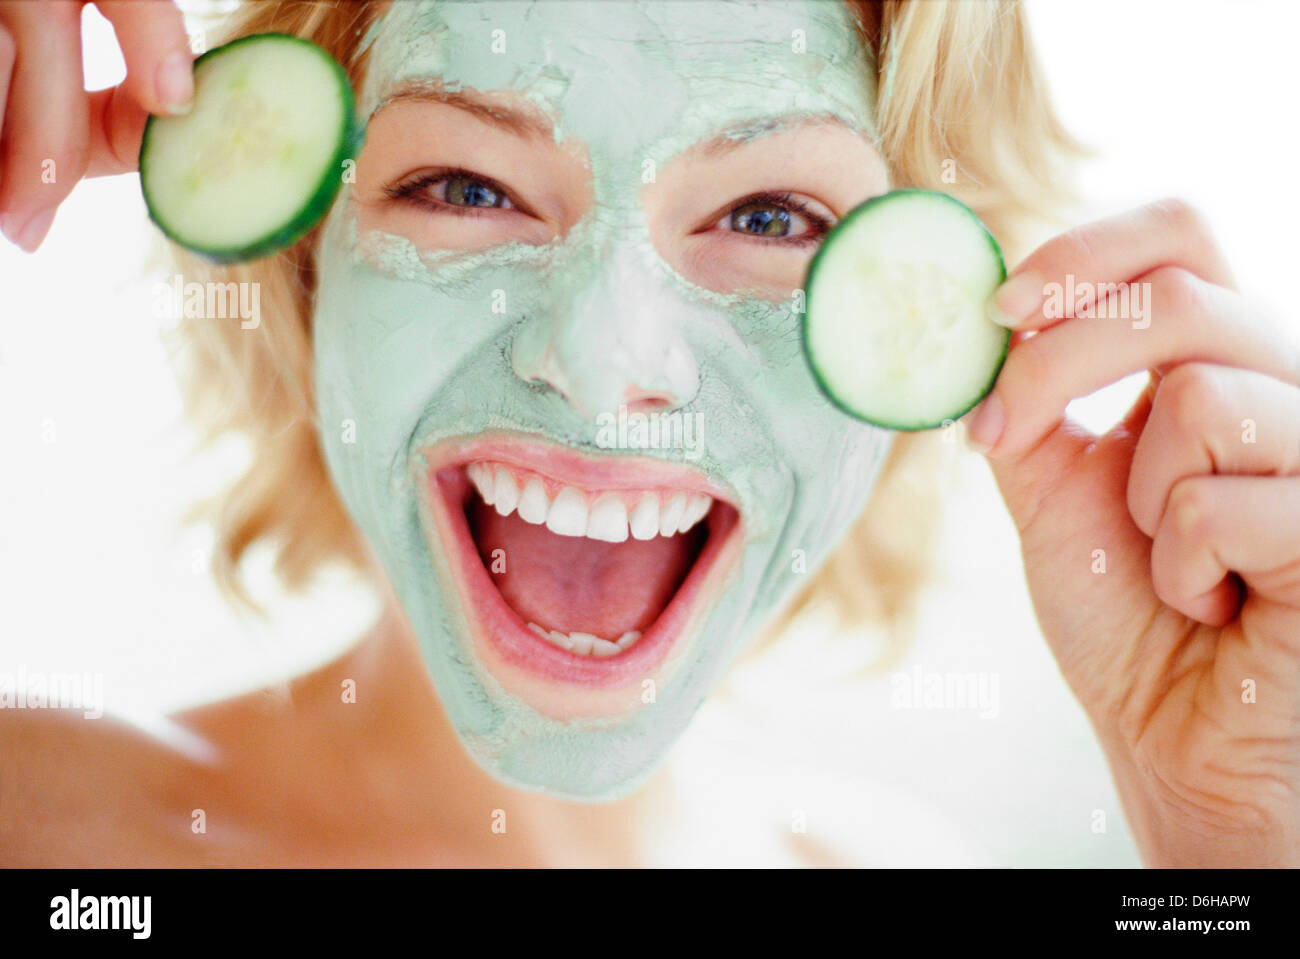 Woman in a face mask Stock Photo